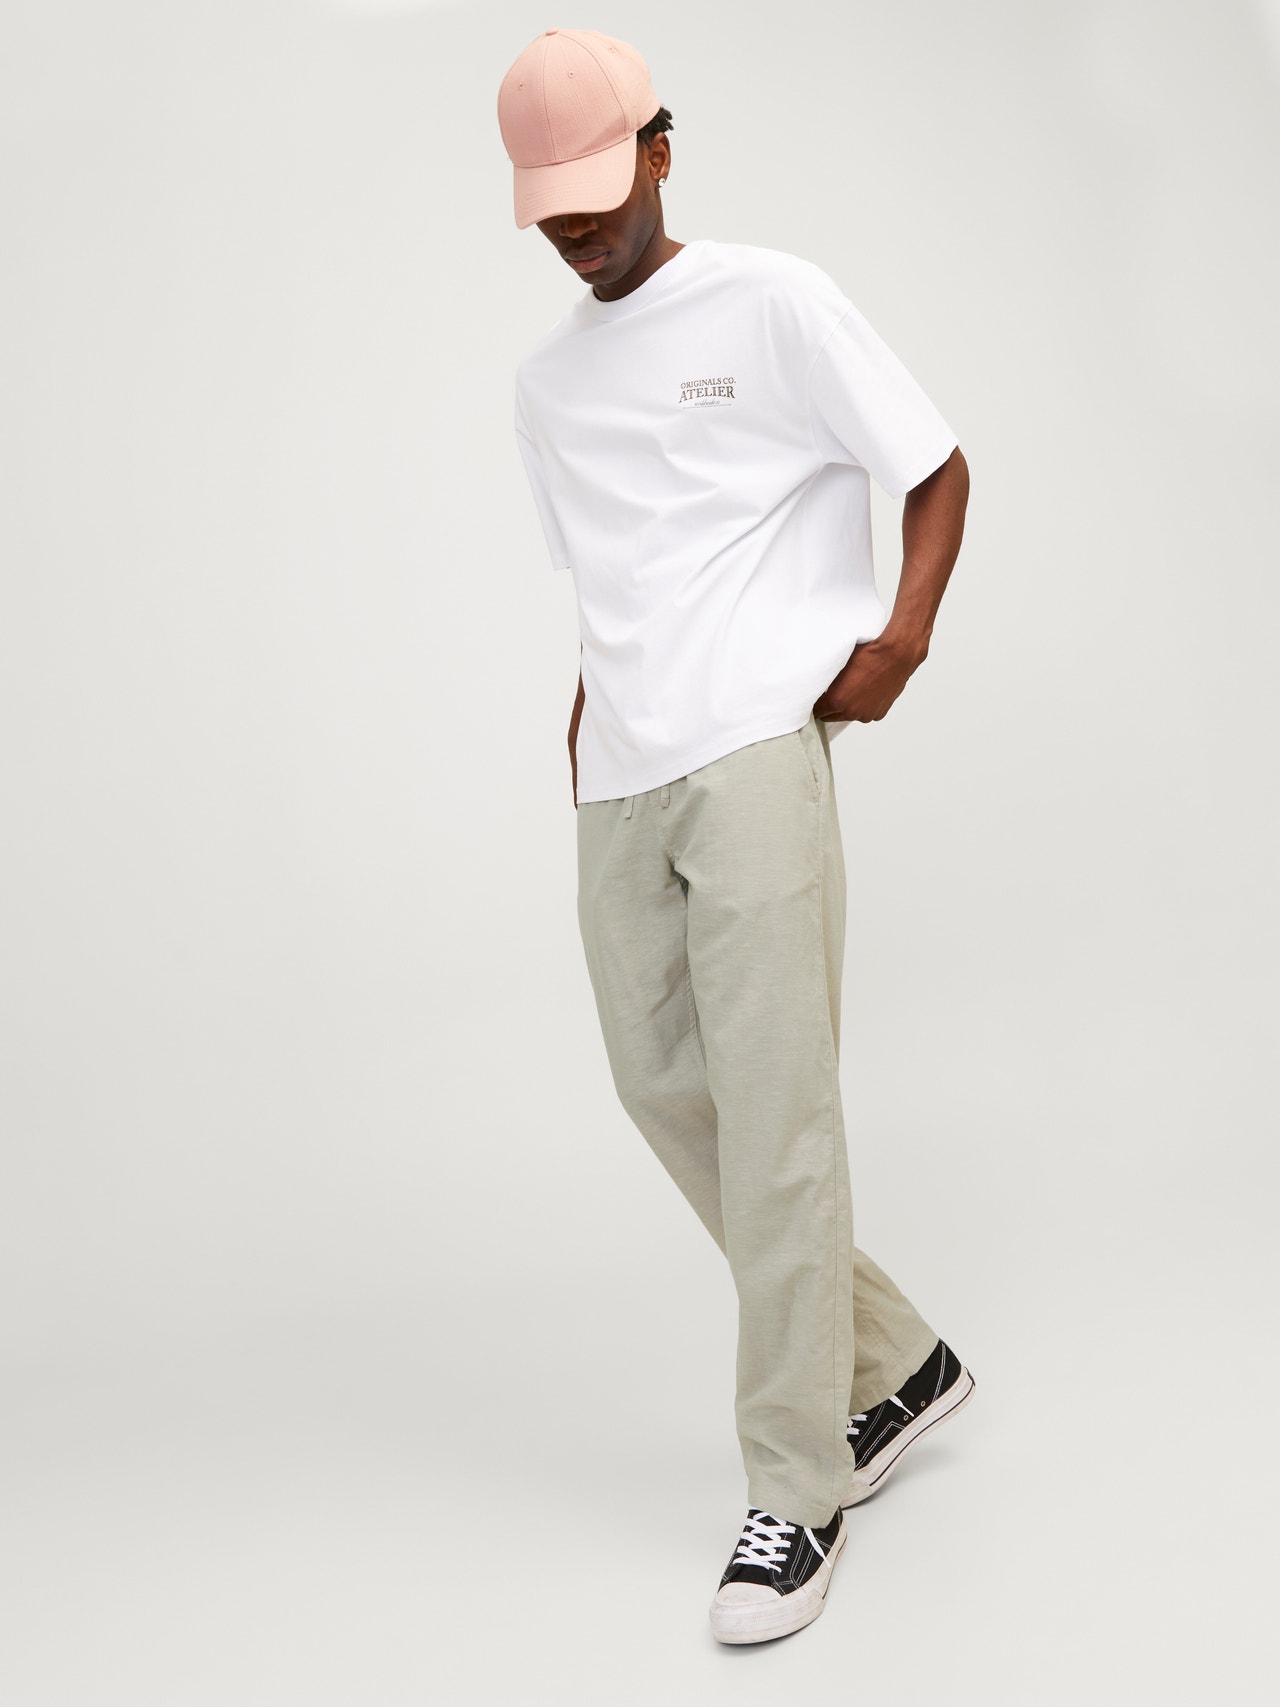 Jack & Jones Relaxed Fit Classic trousers -Wrought Iron - 12248606